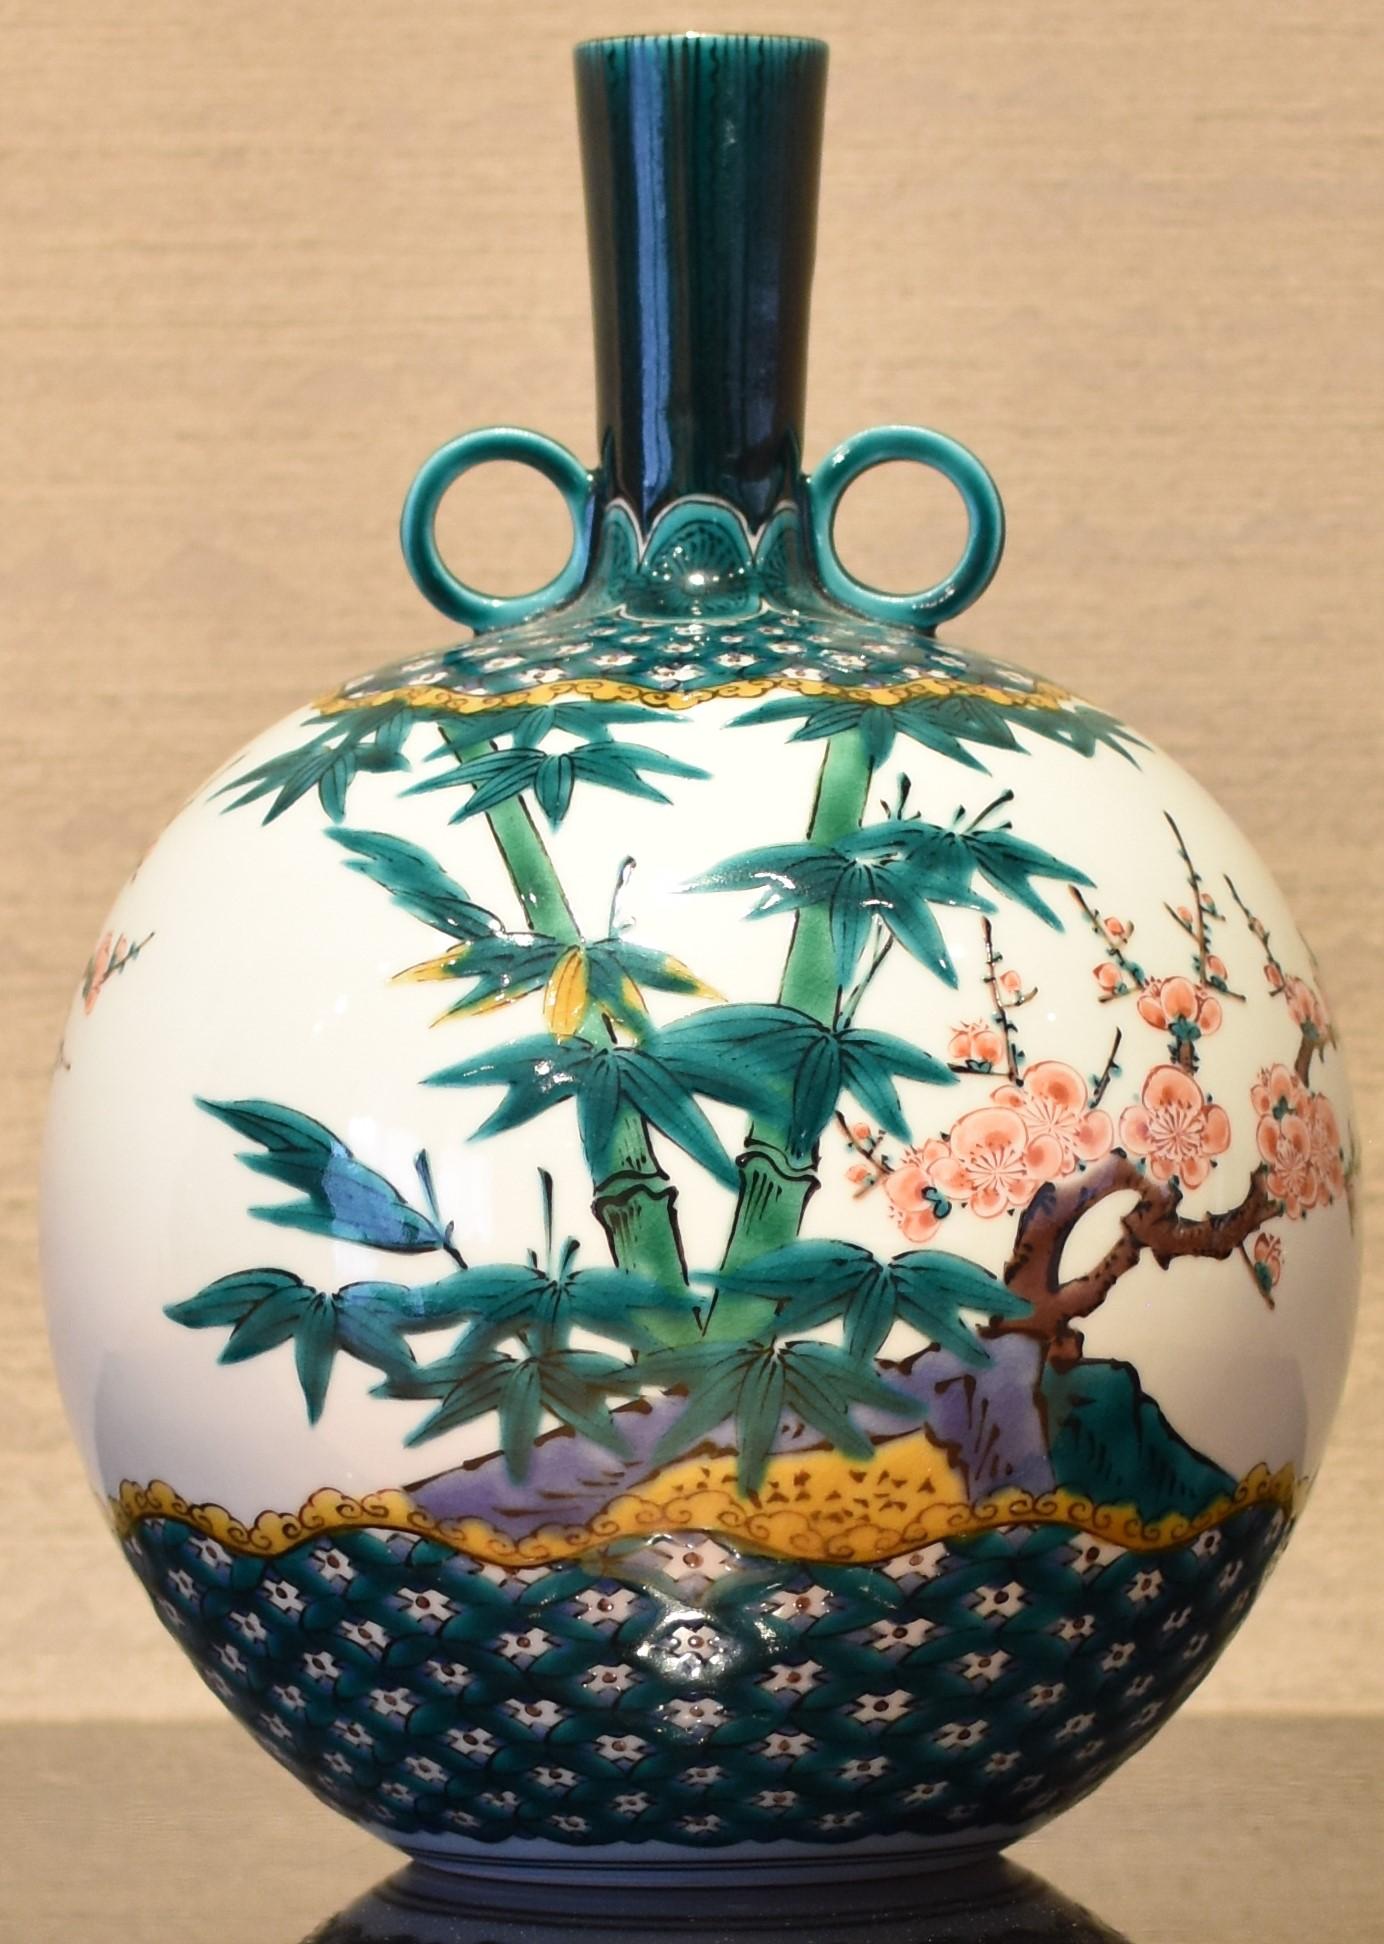 Exceptional Japanese contemporary Kutani decorative porcelain vase, hand painted in Kutani colors of green, red and purple on a stunningly shaped body, a signed masterpiece by the third generation master of a Kutani kiln with a history of more than